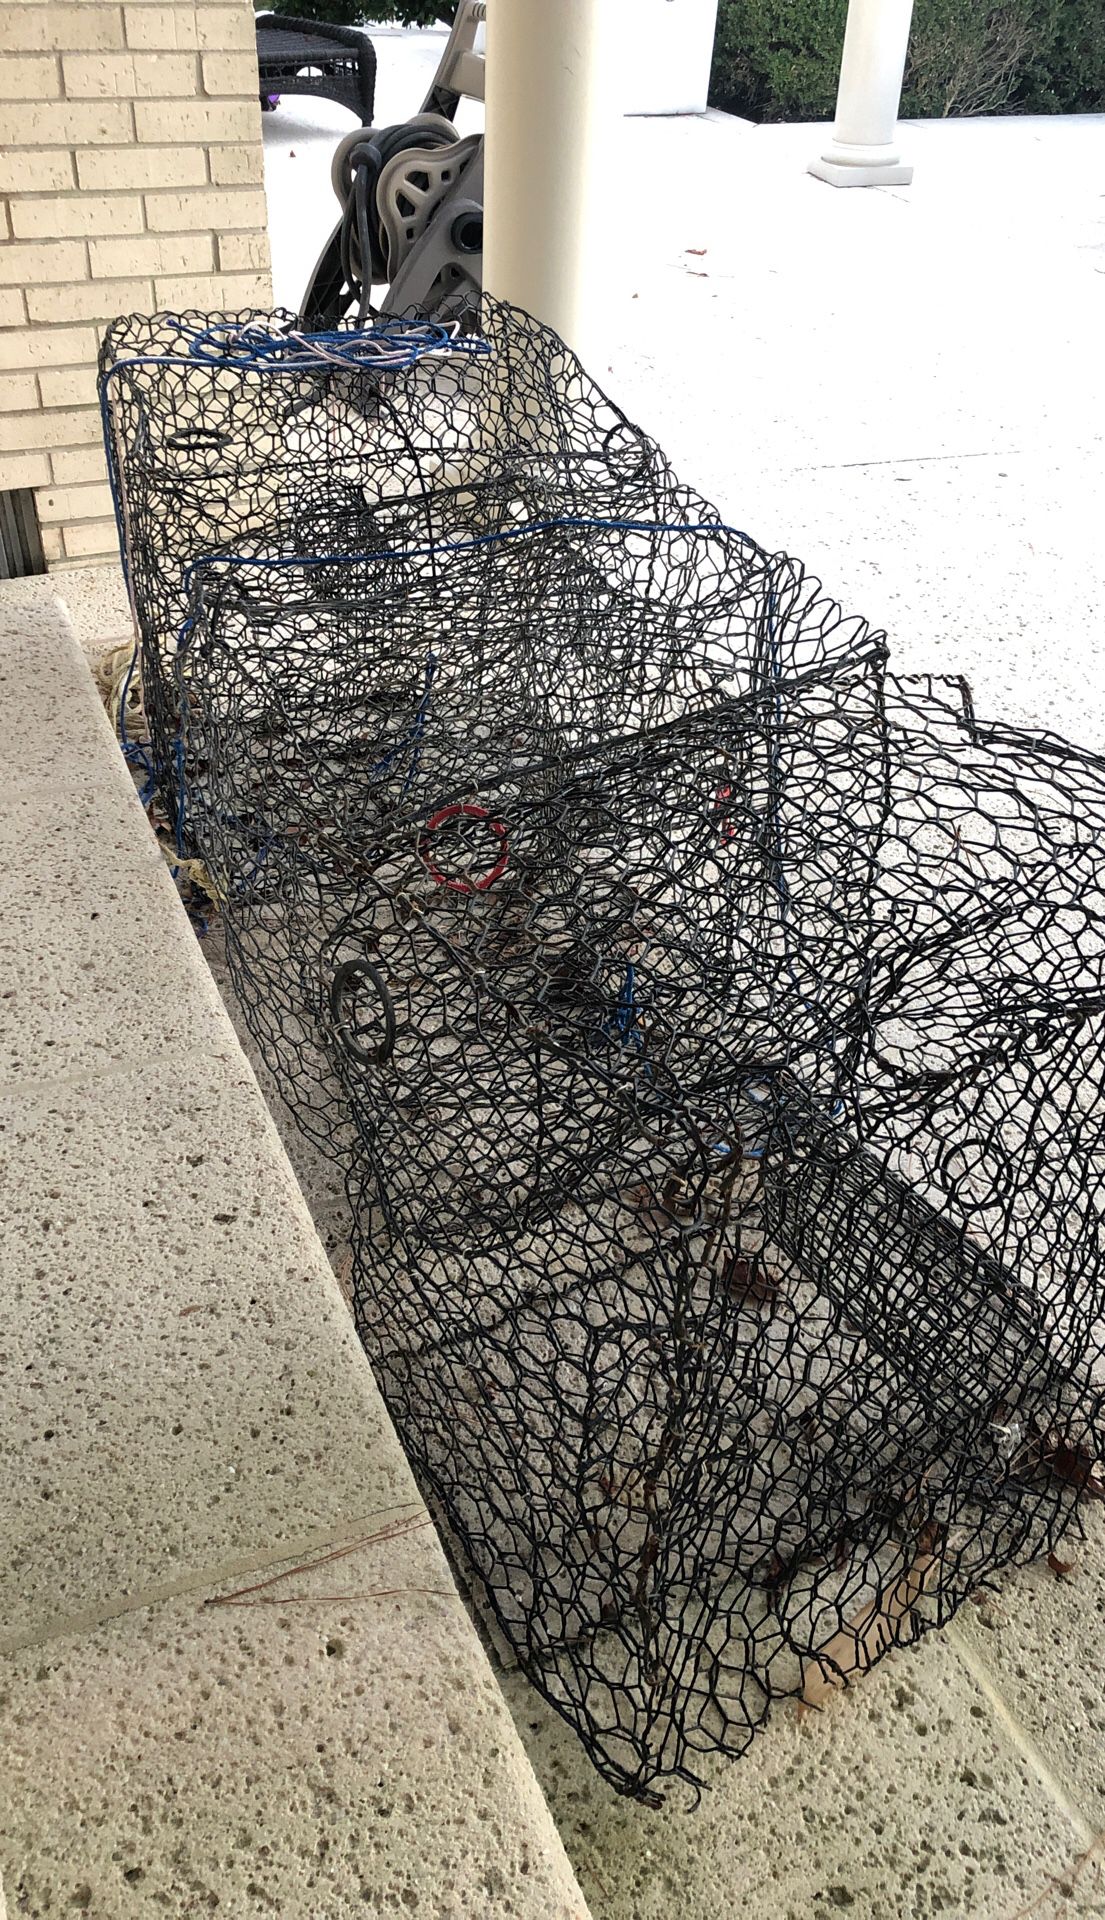 Crab pots - need some wire adjustments / repair